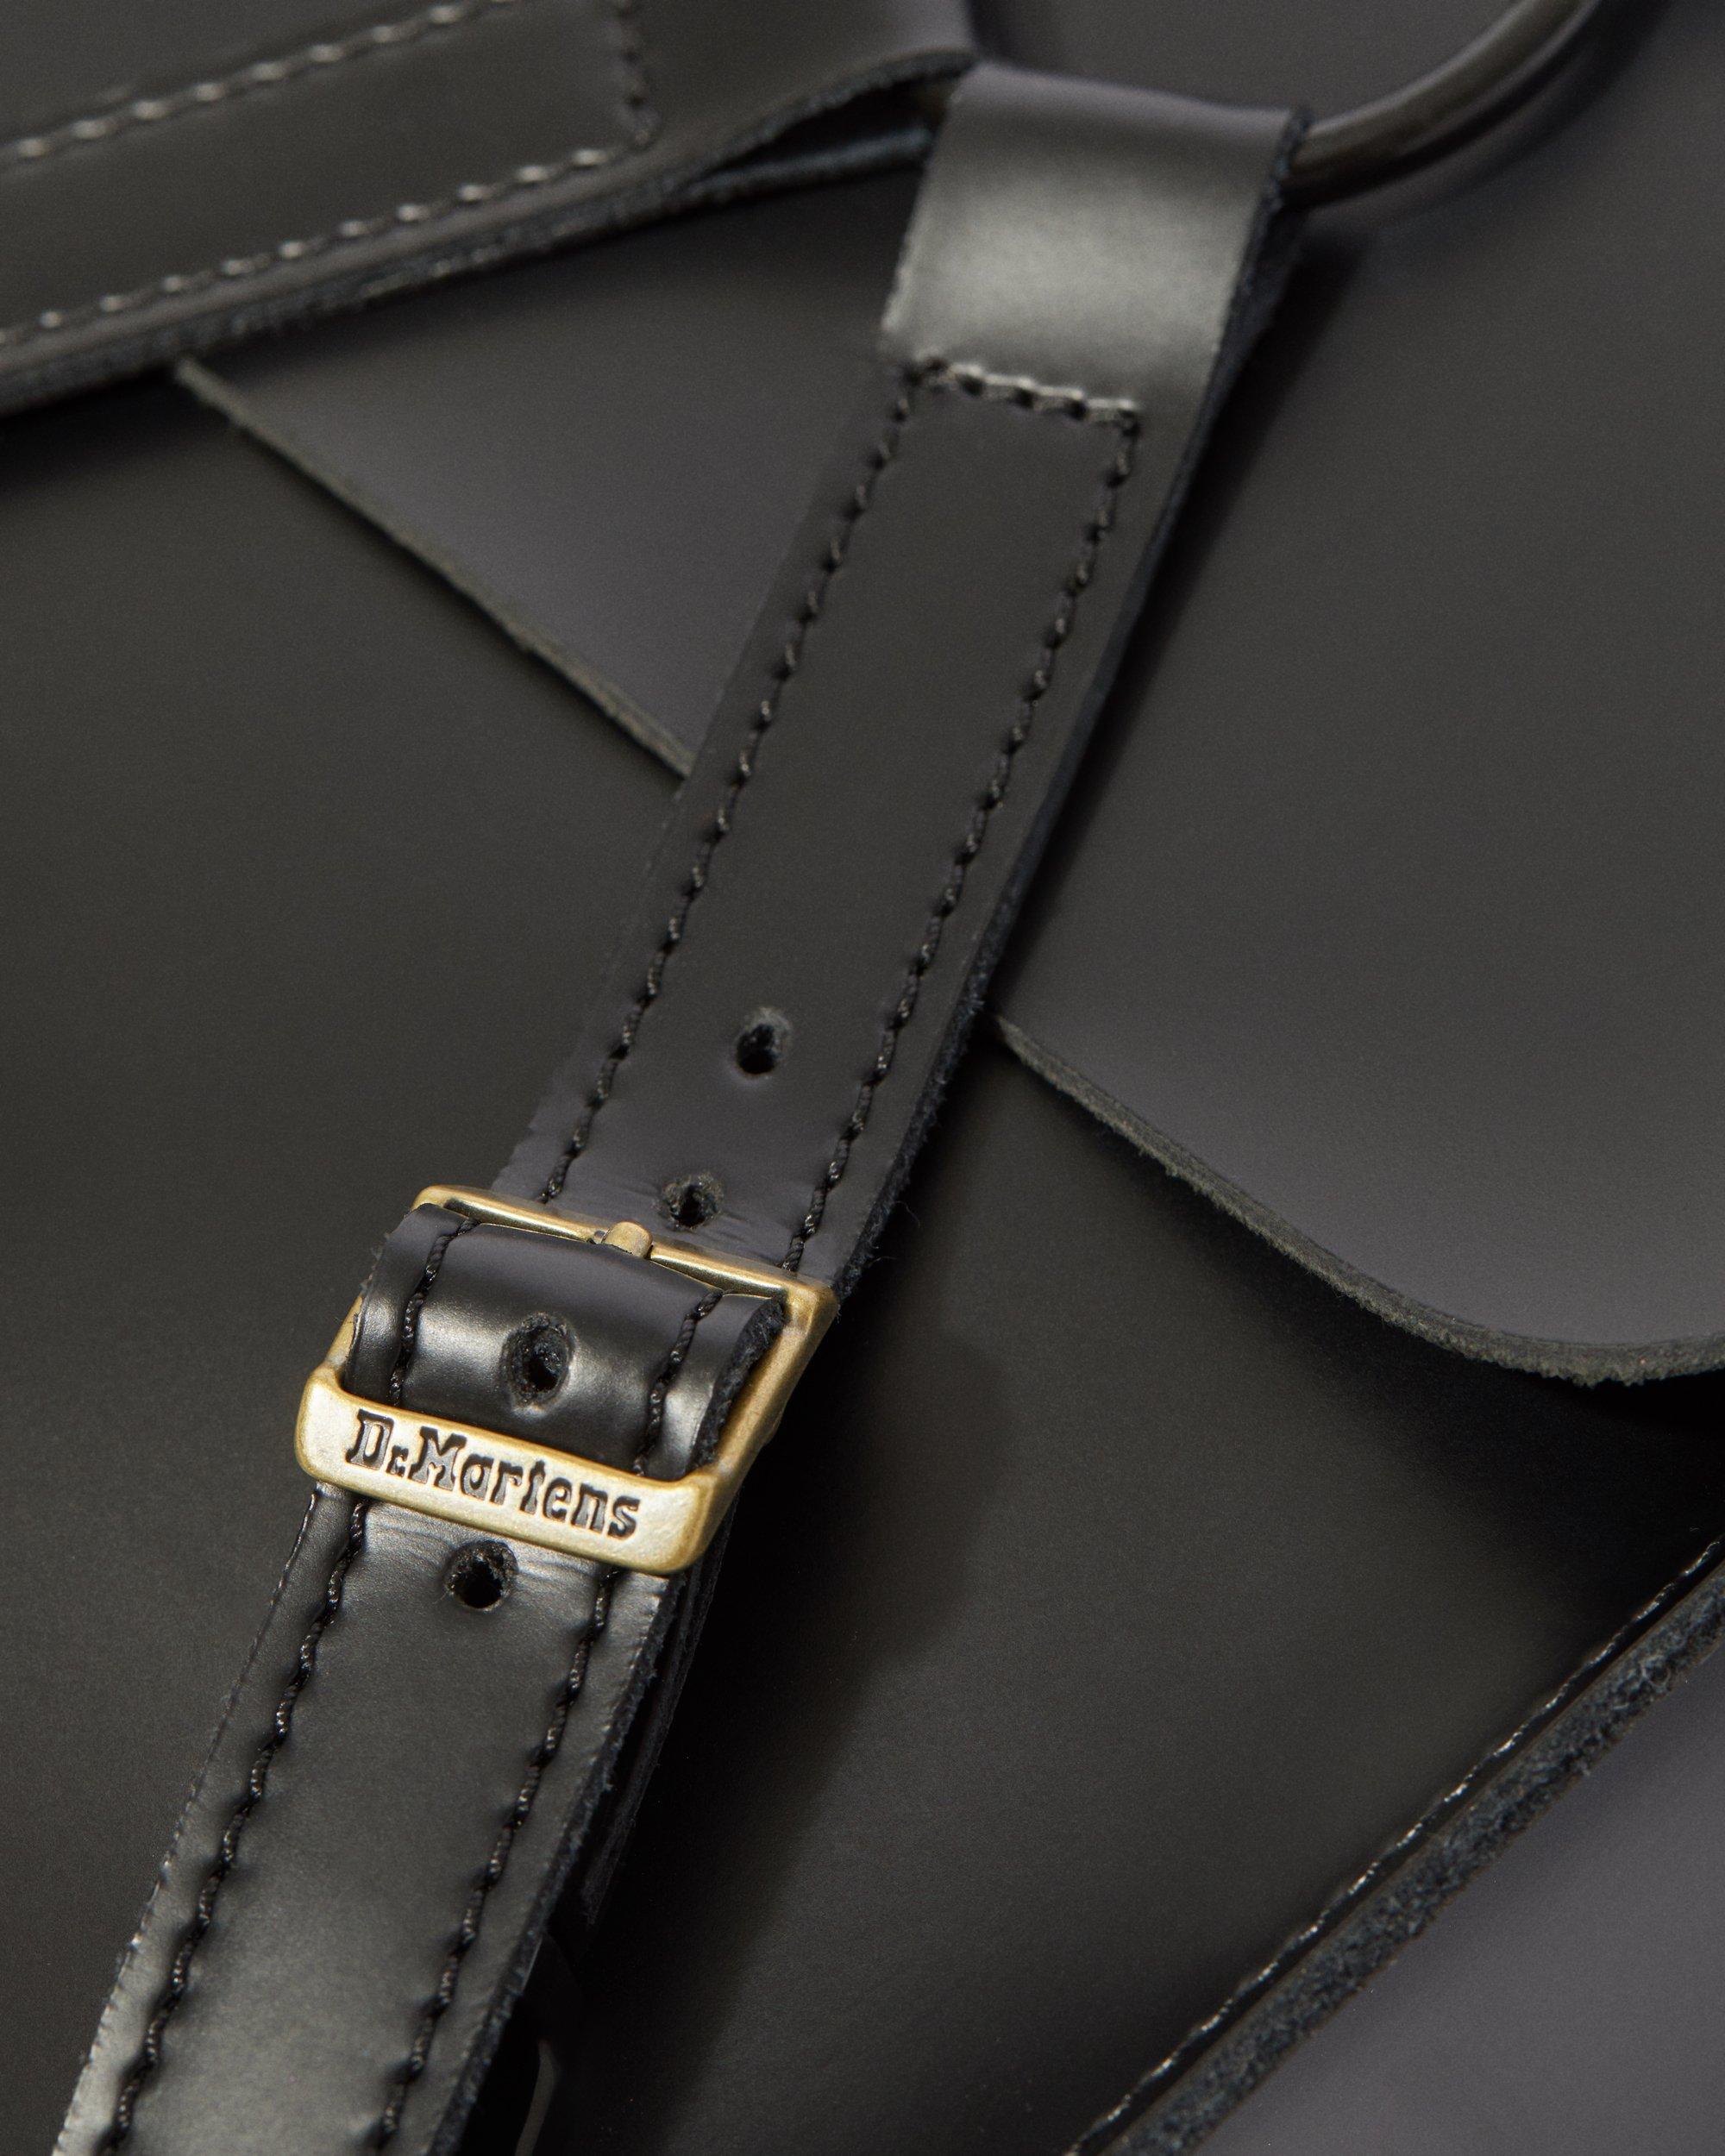 Mini Leather Buckle Backpack in Black